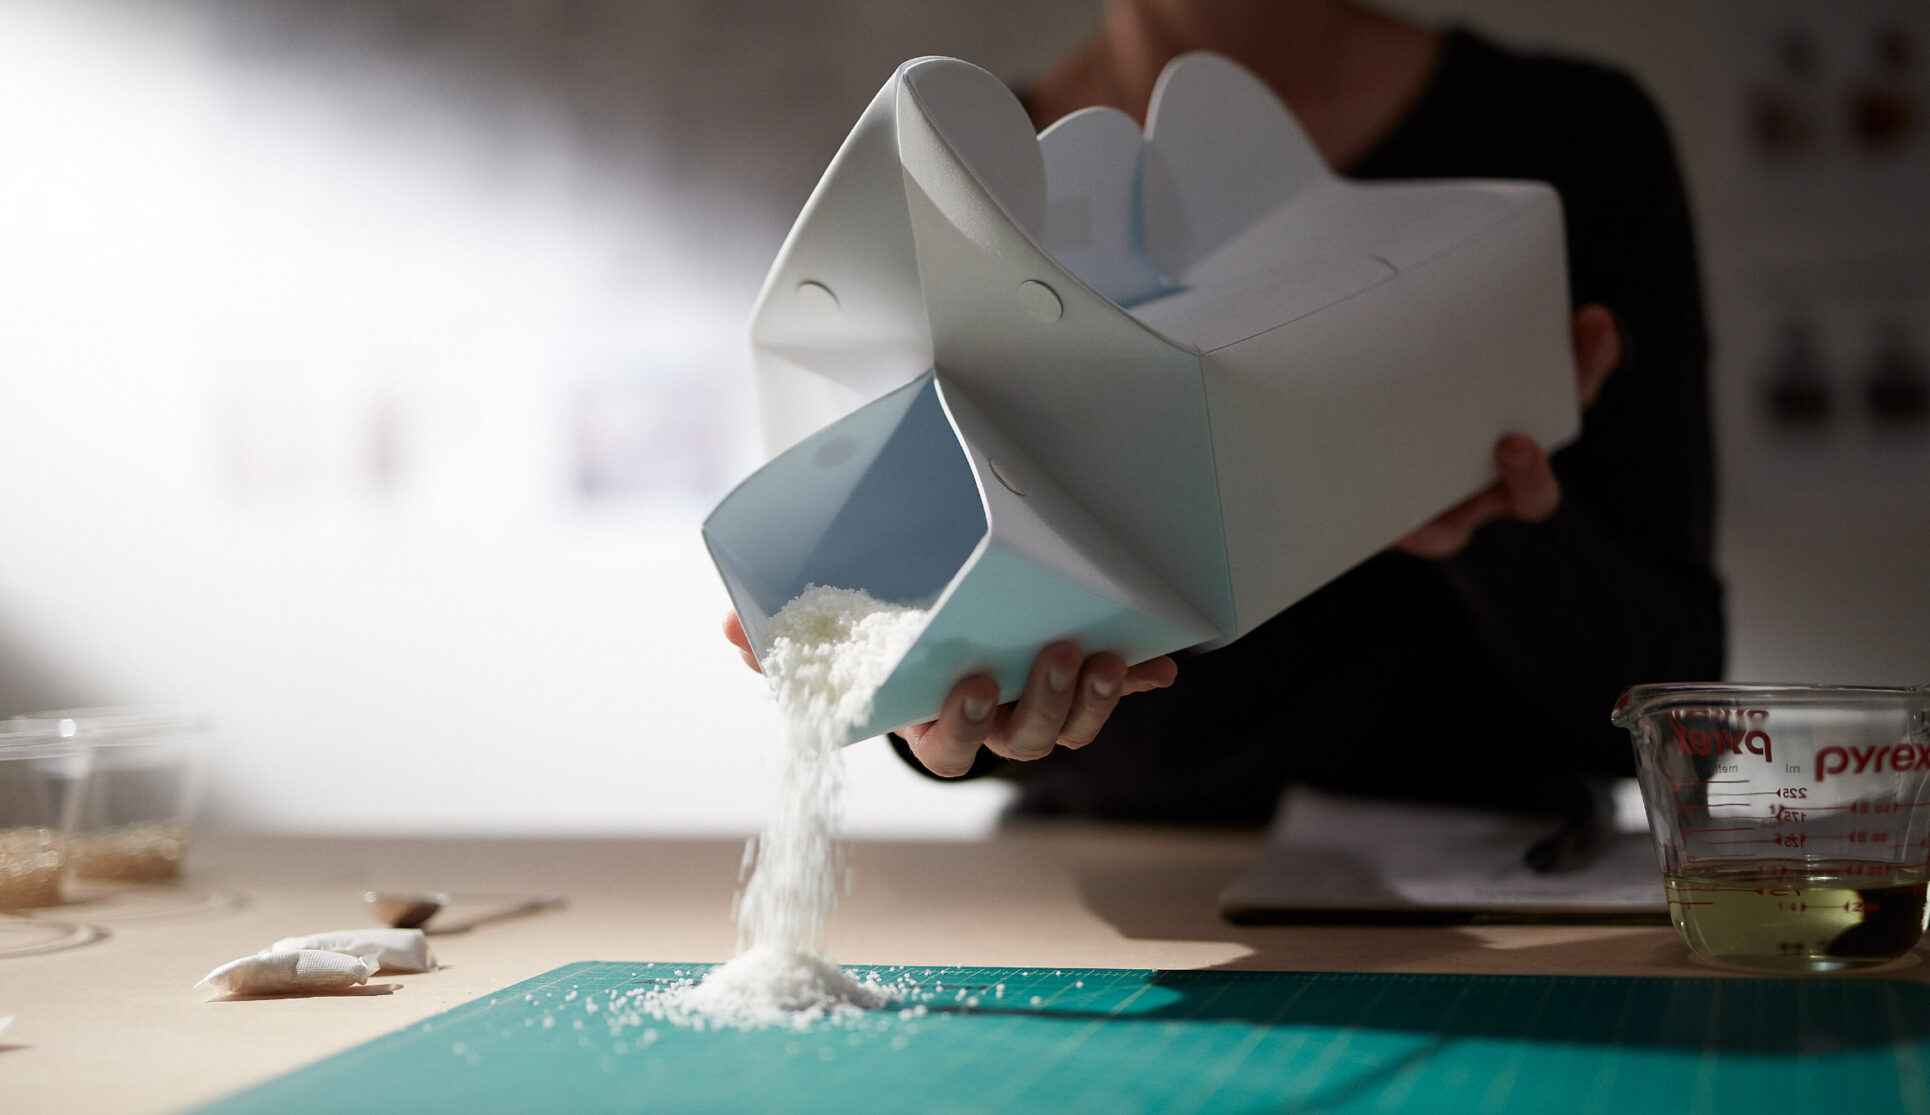 the night loo box powder being poured out onto a table.